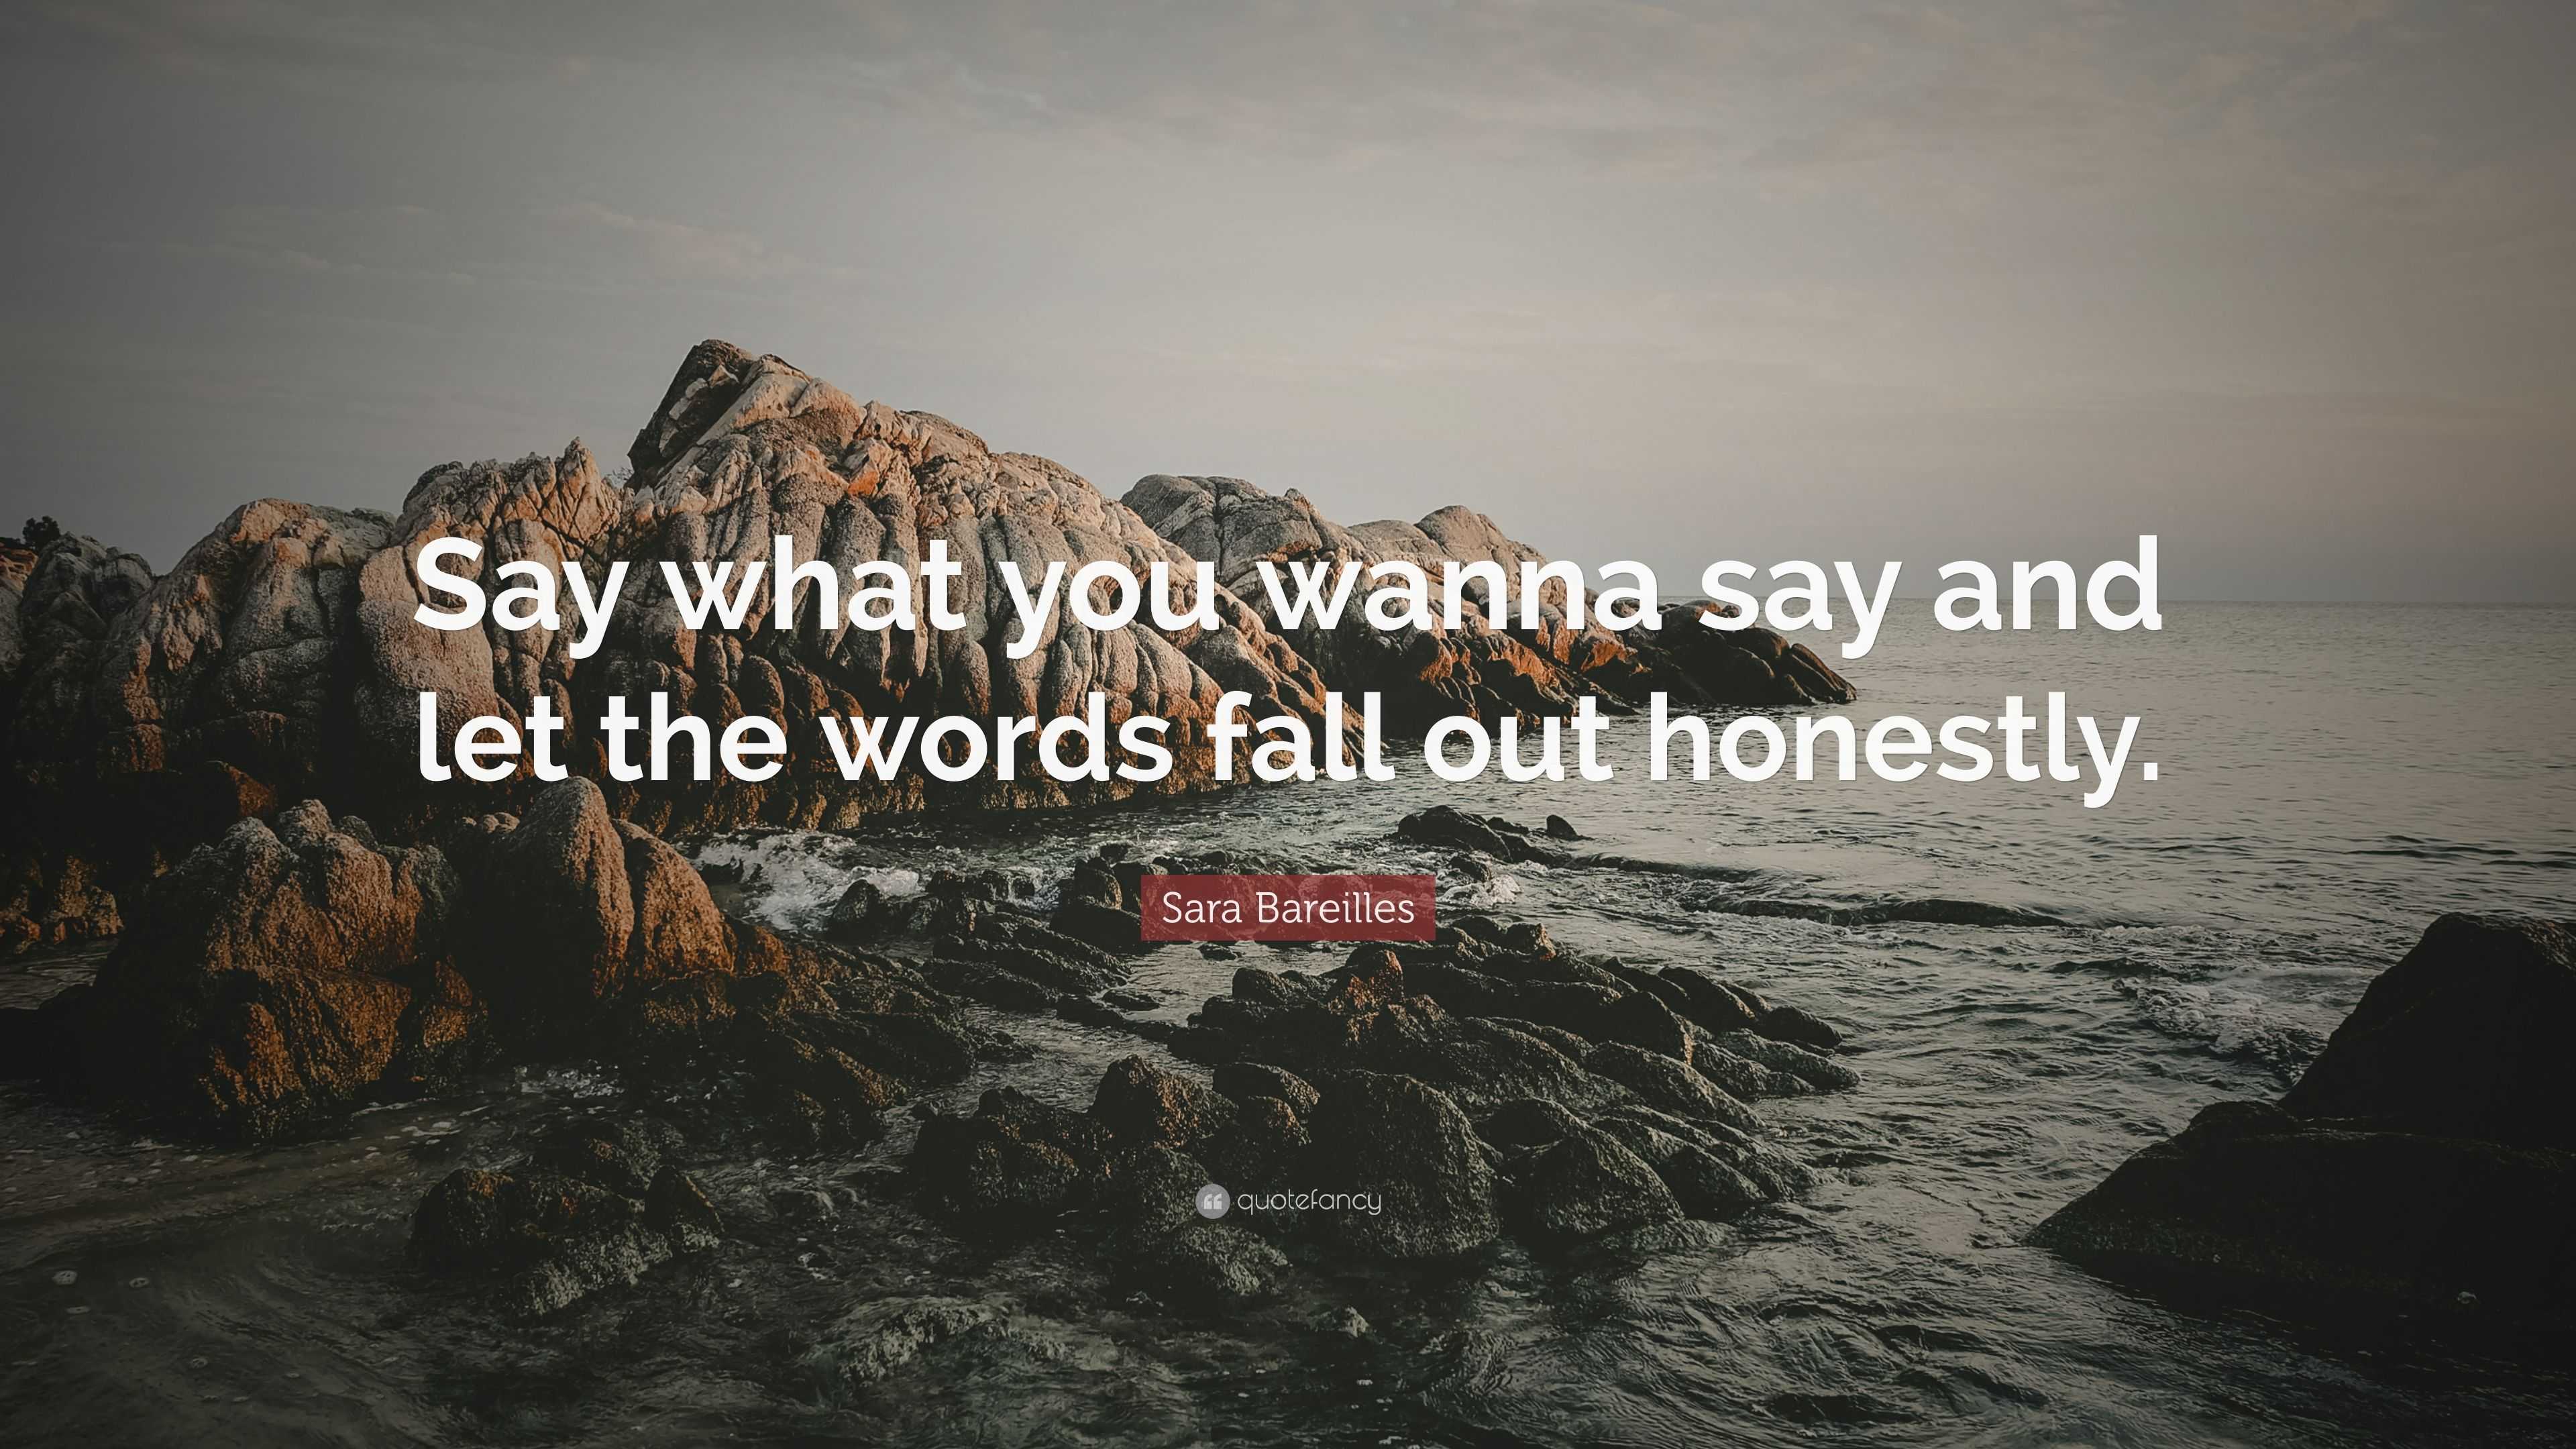 Sara Bareilles Quote Say What You Wanna Say And Let The Words Fall Out Honestly